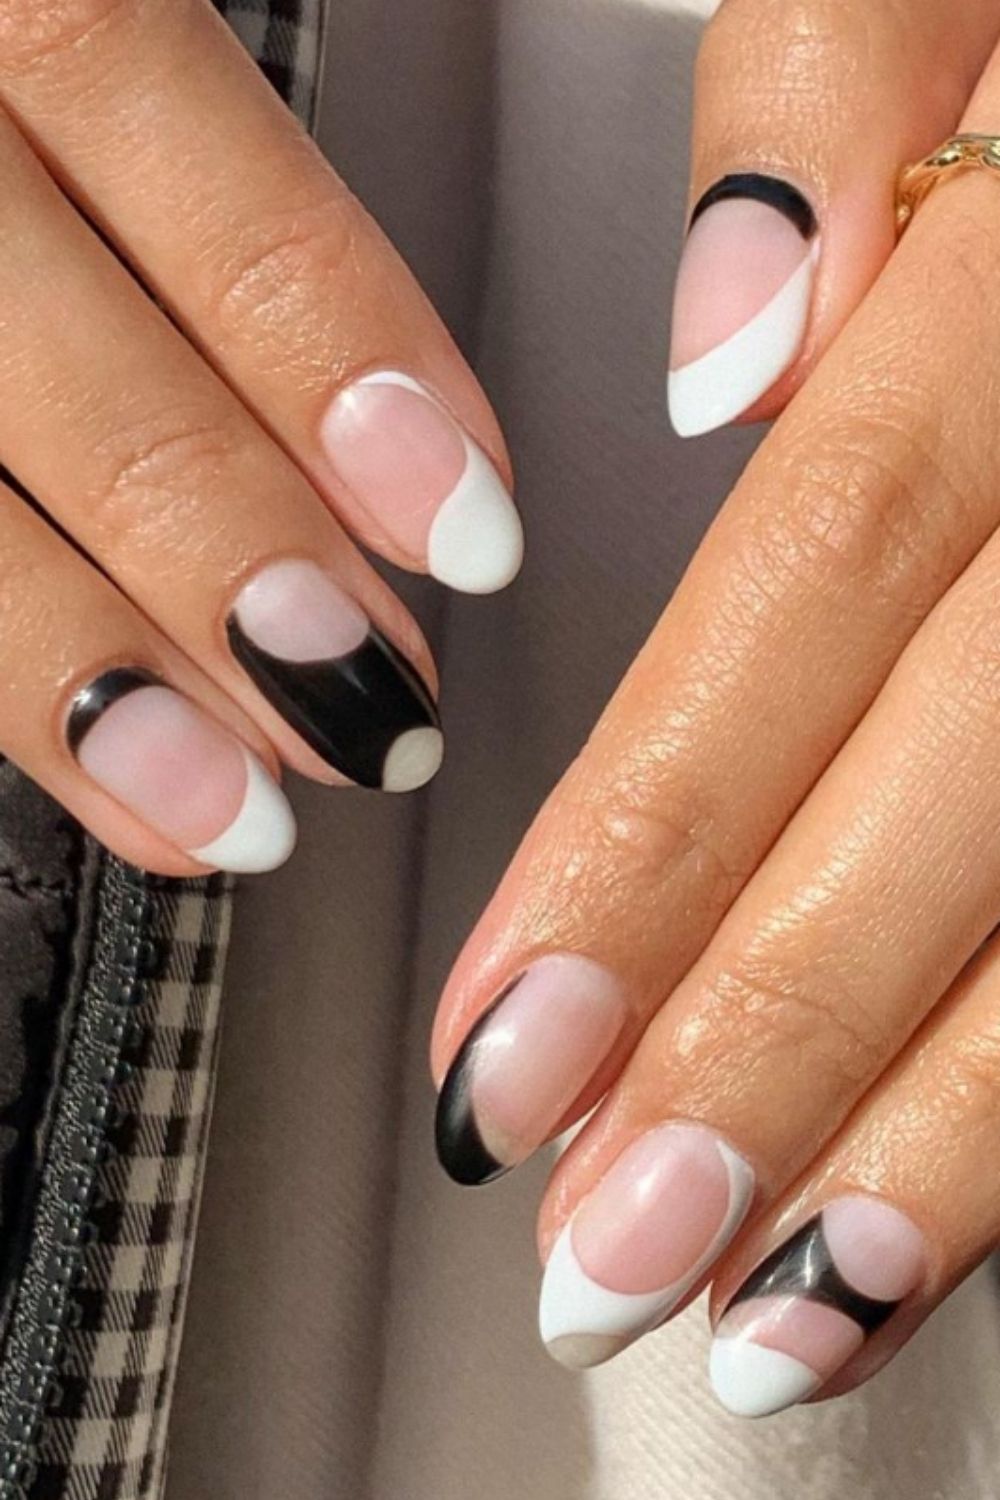 Summer almond nails | To Be All About the Almond Nails This Summer